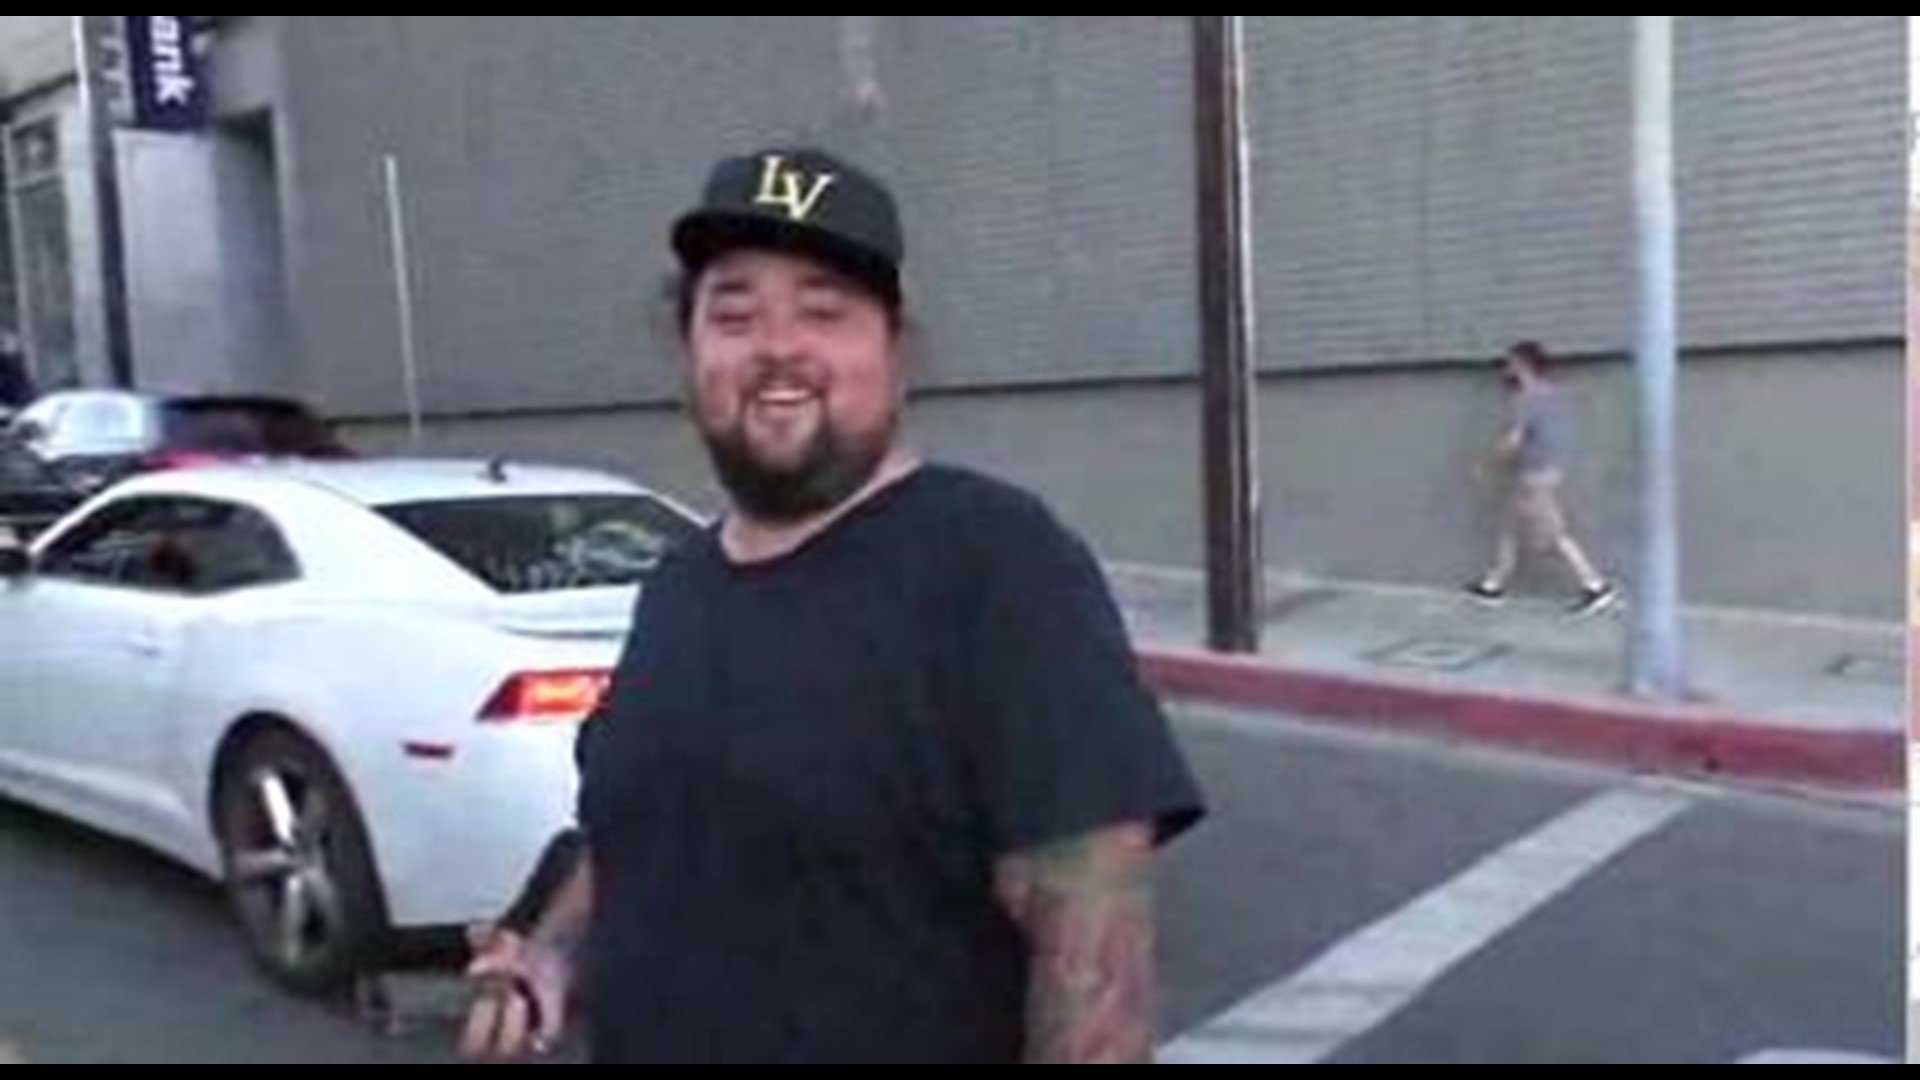 Pawn Stars Chumlee Jailed On 19 Drug Possession Charges Weapons Charge 